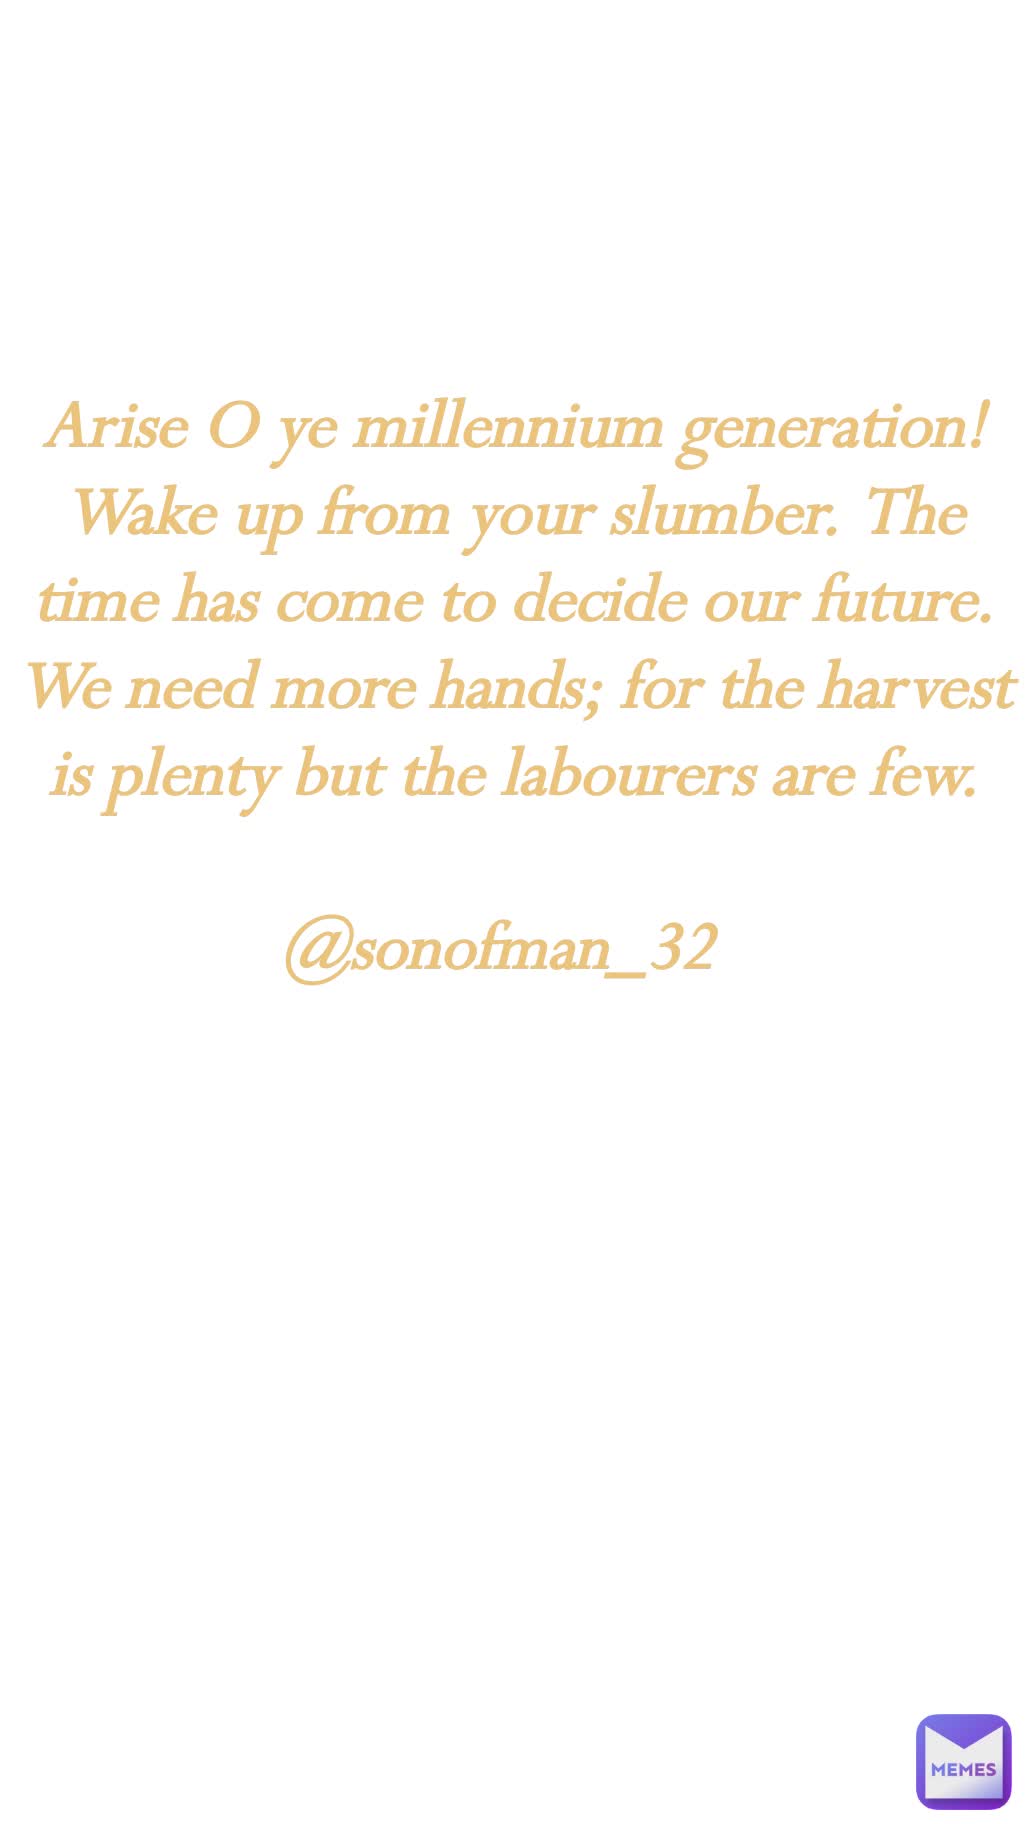 
Arise O ye millennium generation! Wake up from your slumber. The time has come to decide our future. We need more hands; for the harvest is plenty but the labourers are few.

@sonofman_32